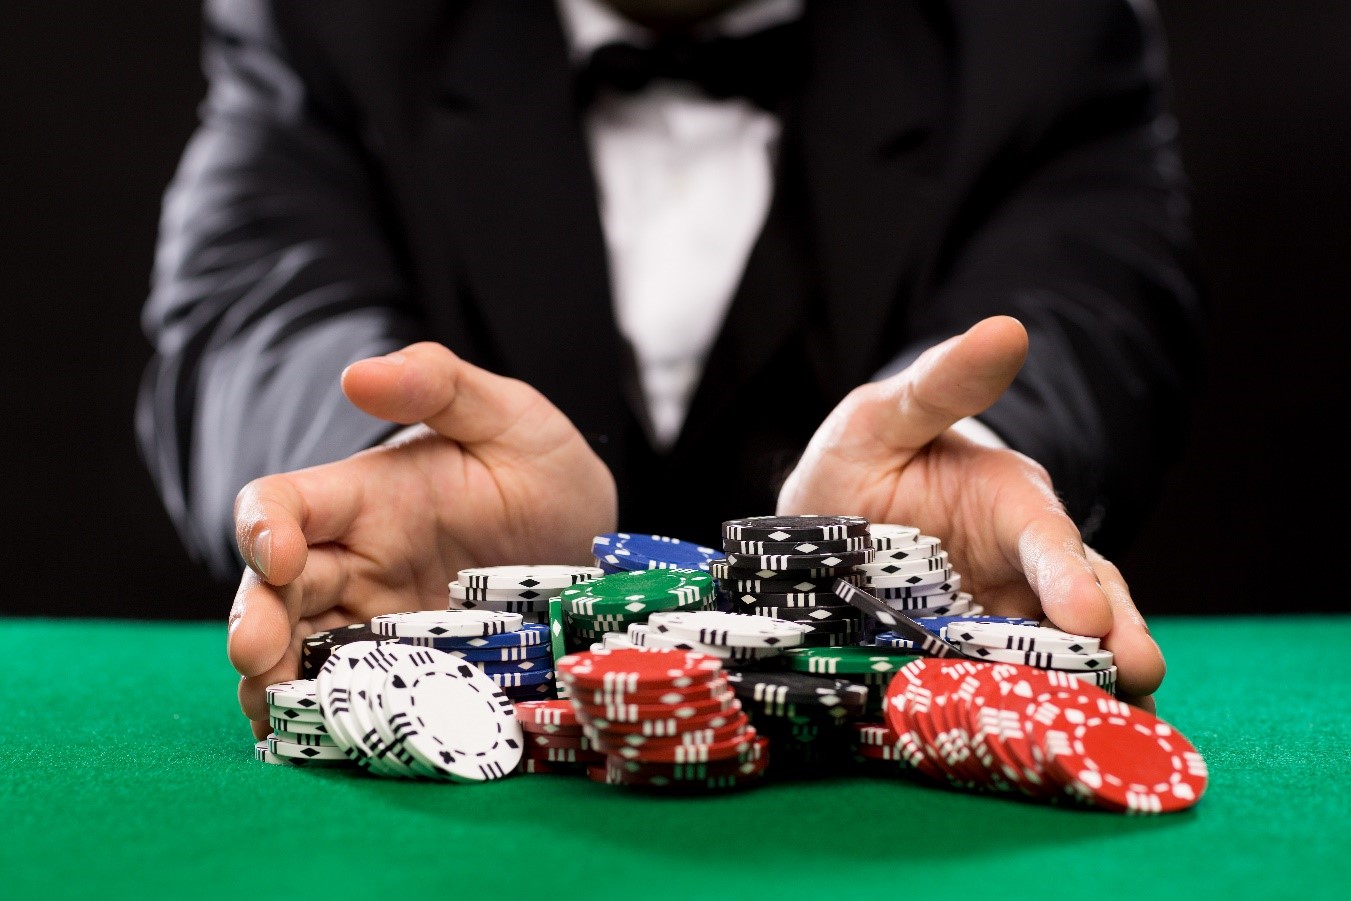 The popularity of Poker